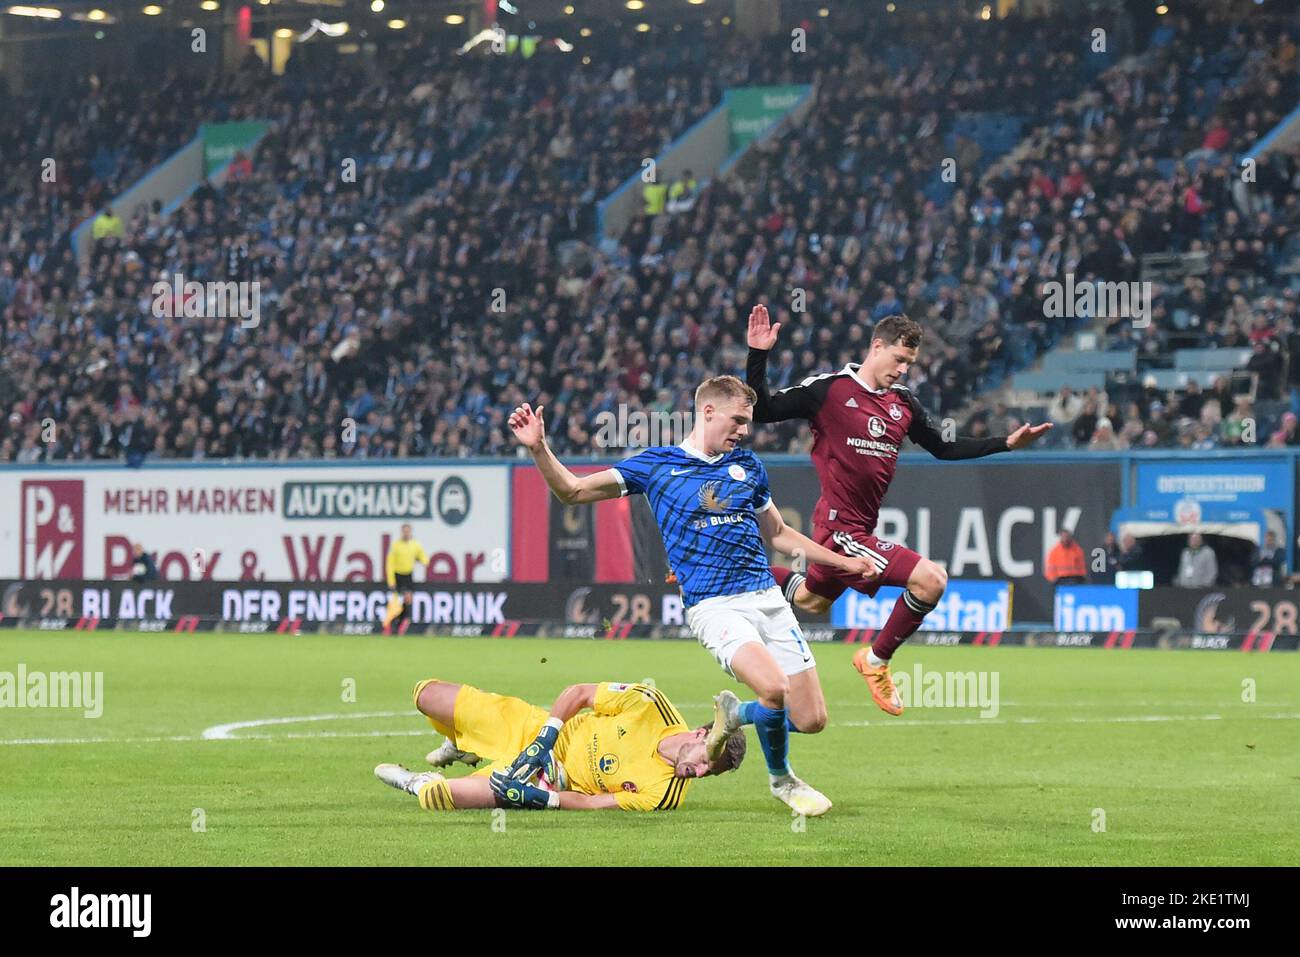 Rostock, Germany. 09th Nov, 2022. Soccer: 2. Bundesliga, Hansa Rostock - 1. FC Nürnberg, Matchday 16, Ostseestadion. Rostock's Svante Ingelsson and Nuremberg's Jamie Lawrence run over Nuremberg goalkeeper Christian Mathenia. Credit: Gregor Fischer/dpa - IMPORTANT NOTE: In accordance with the requirements of the DFL Deutsche Fußball Liga and the DFB Deutscher Fußball-Bund, it is prohibited to use or have used photographs taken in the stadium and/or of the match in the form of sequence pictures and/or video-like photo series./dpa/Alamy Live News Stock Photo